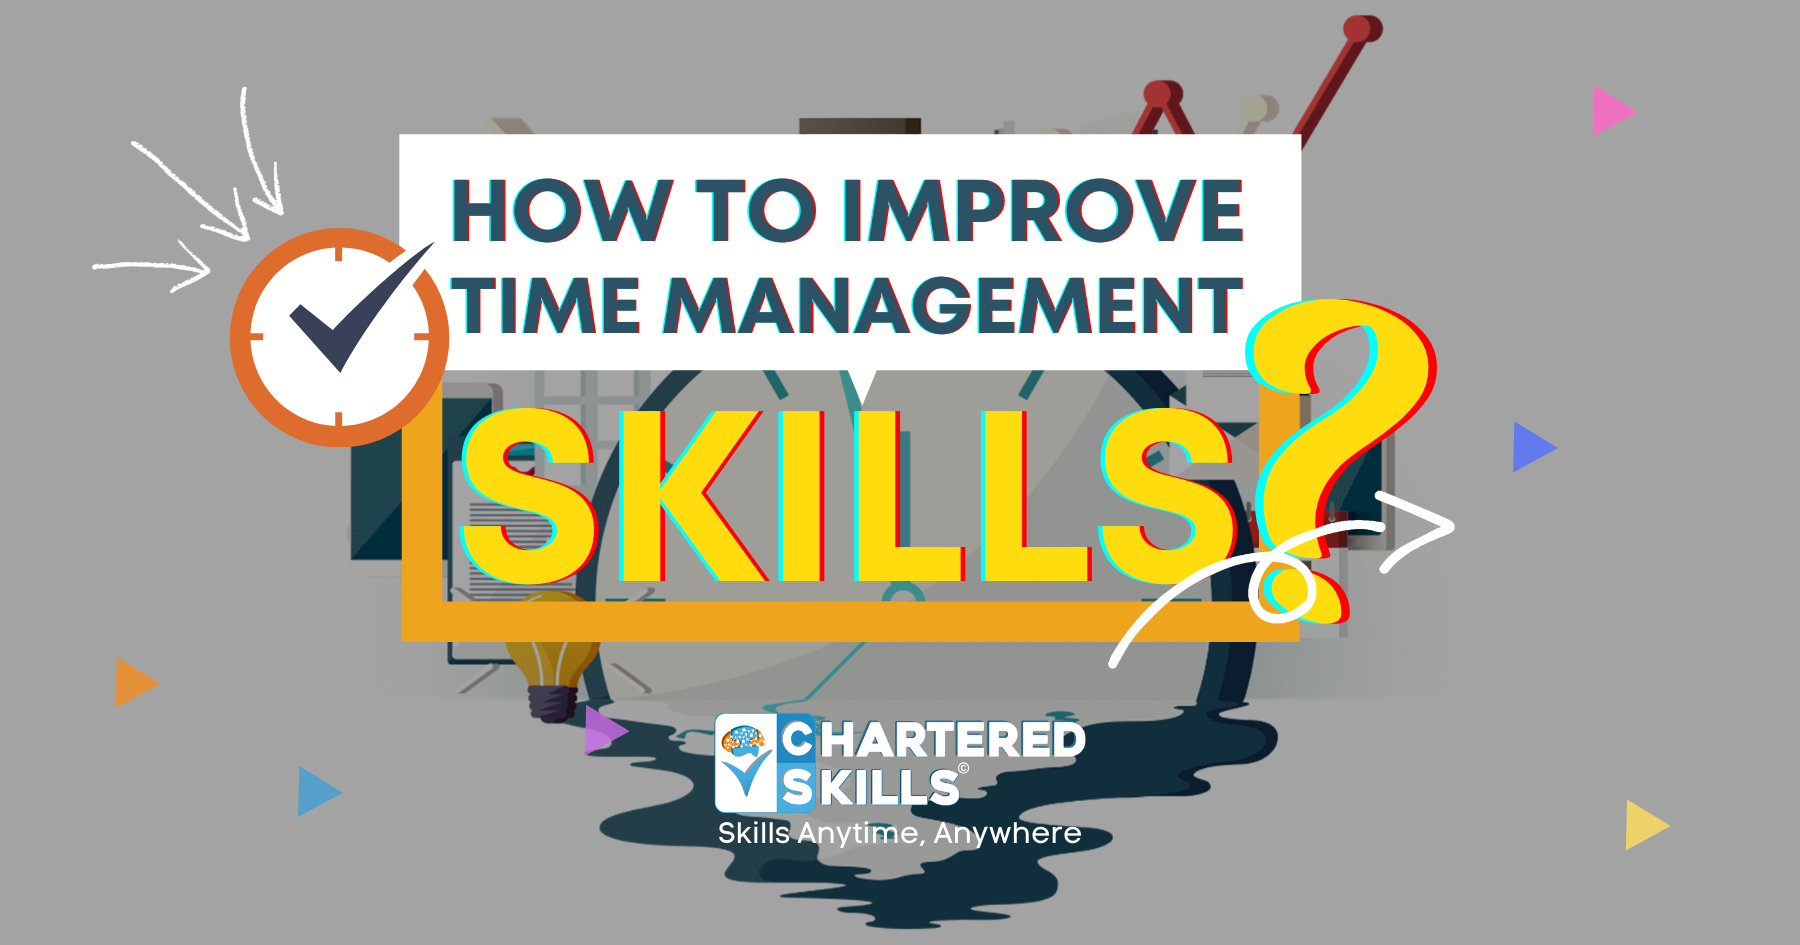 How to improve time management skills?